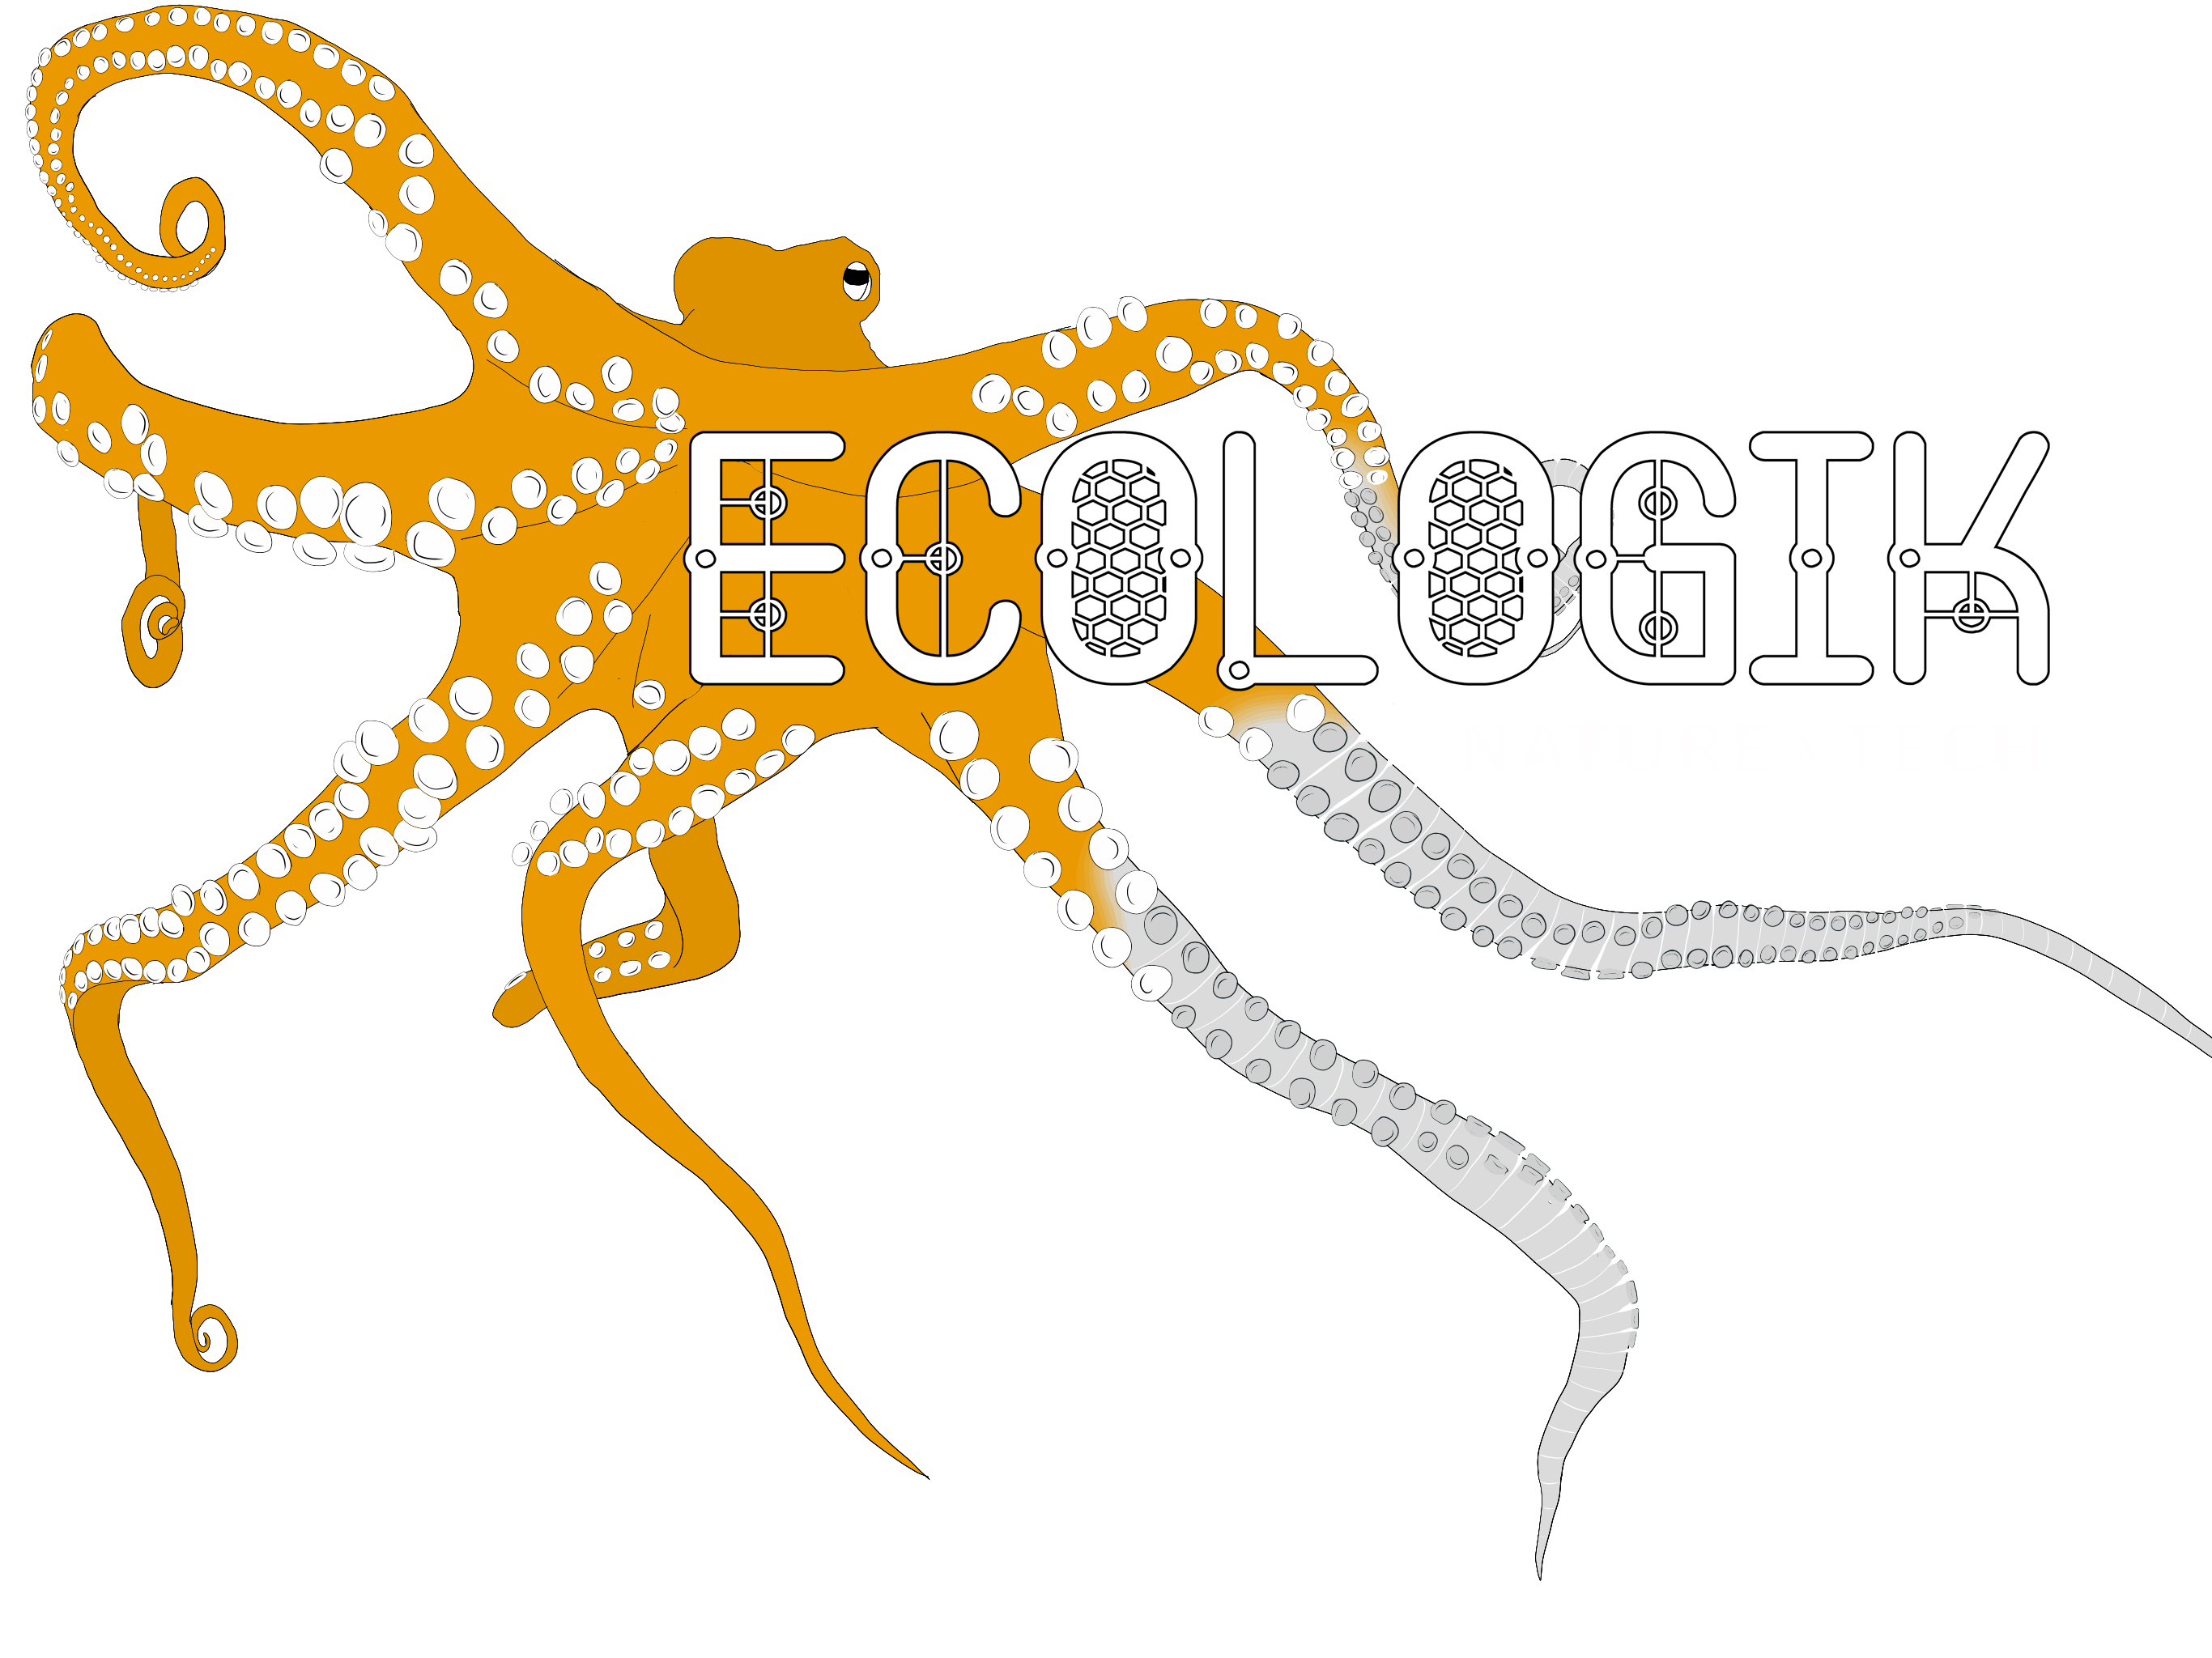 Orange octopus with spread tentacles and the words "Ecologik Nature x Tech" overlaying it.